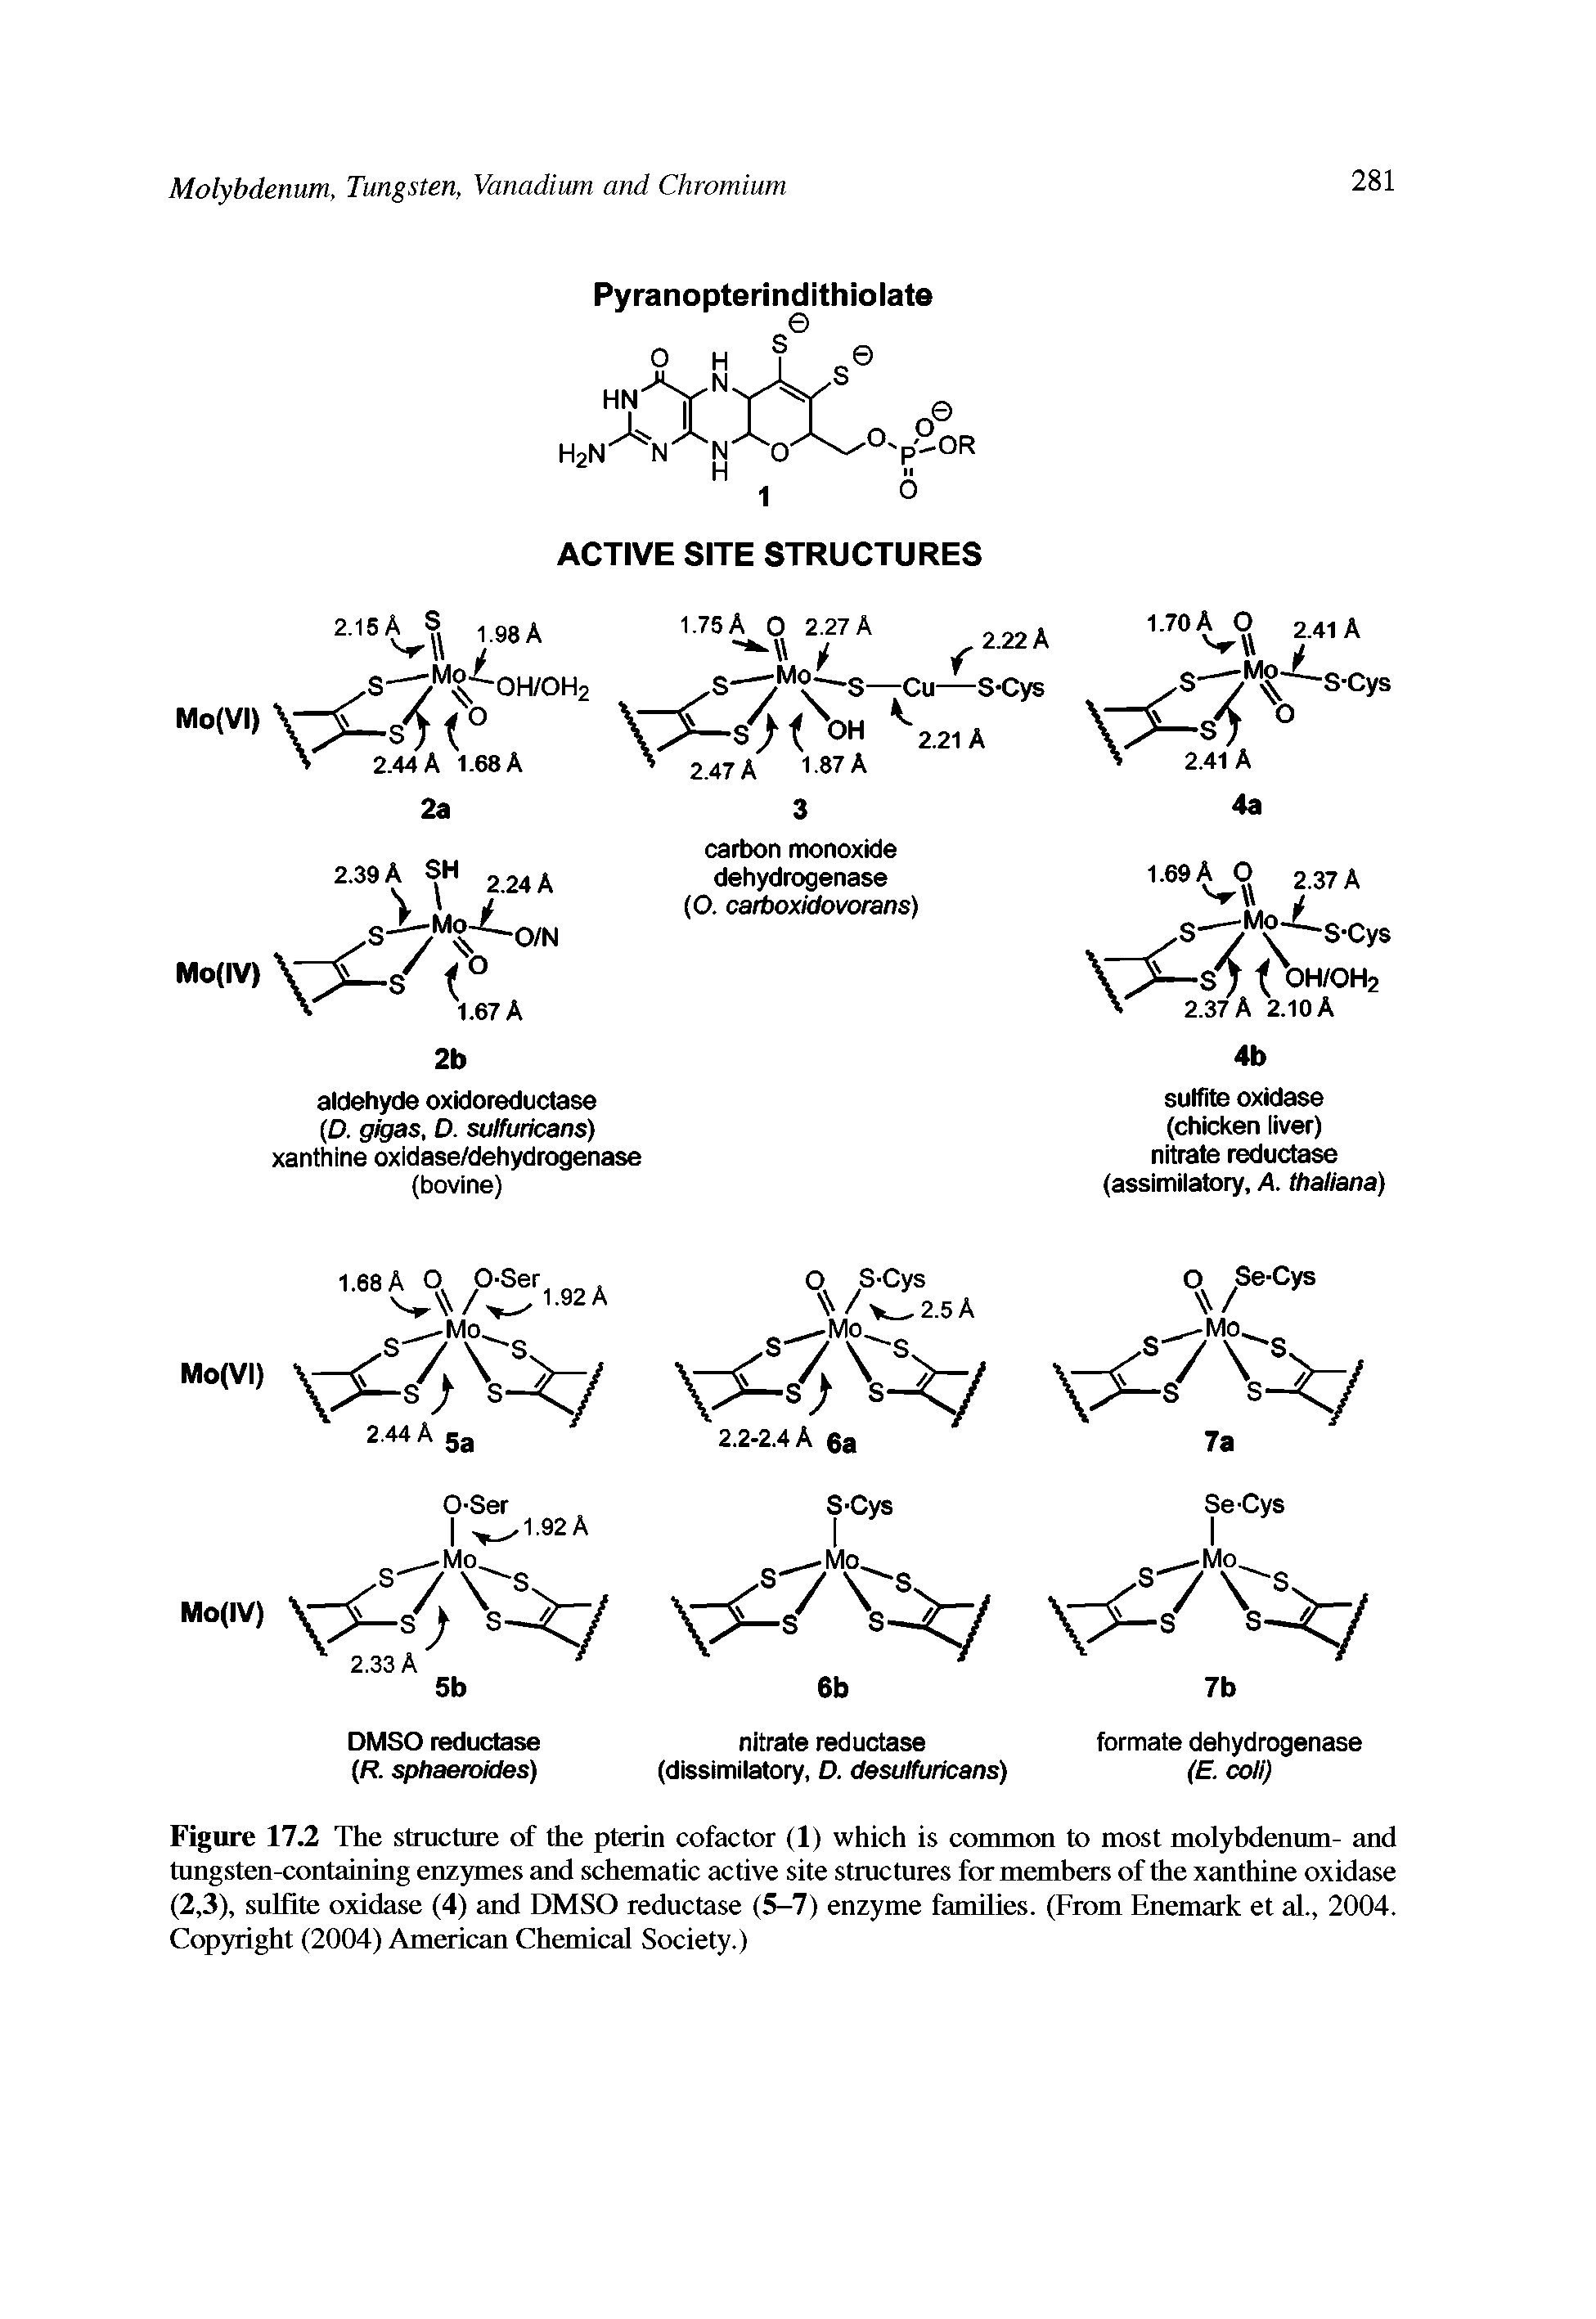 Figure 17.2 The structure of the pterin cofactor (1) which is common to most molybdenum- and tungsten-containing enzymes and schematic active site structures for members of the xanthine oxidase (2,3), sulfite oxidase (4) and DMSO reductase (5-7) enzyme families. (From Enemark et al., 2004. Copyright (2004) American Chemical Society.)...